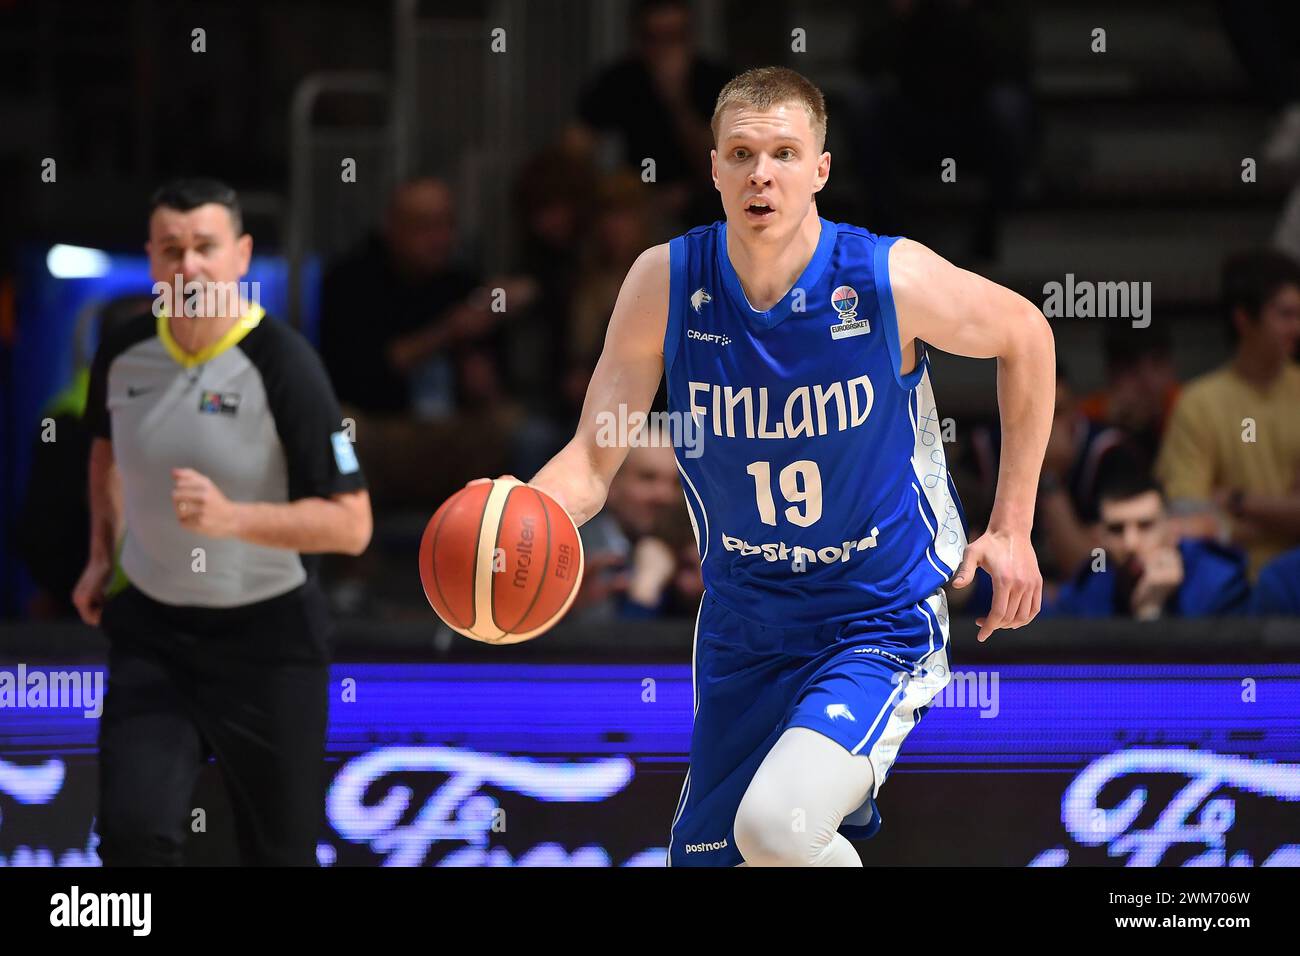 Belgrade, Serbia, 23 February, 2023. Elias Valtonen of Finland in action during the EuroBasket 2025 Qualifiers match between Serbia and Finland at Aleksandar Nikolic in Belgrade, Serbia. February 23, 2023. Credit: Nikola Krstic/Alamy Stock Photo